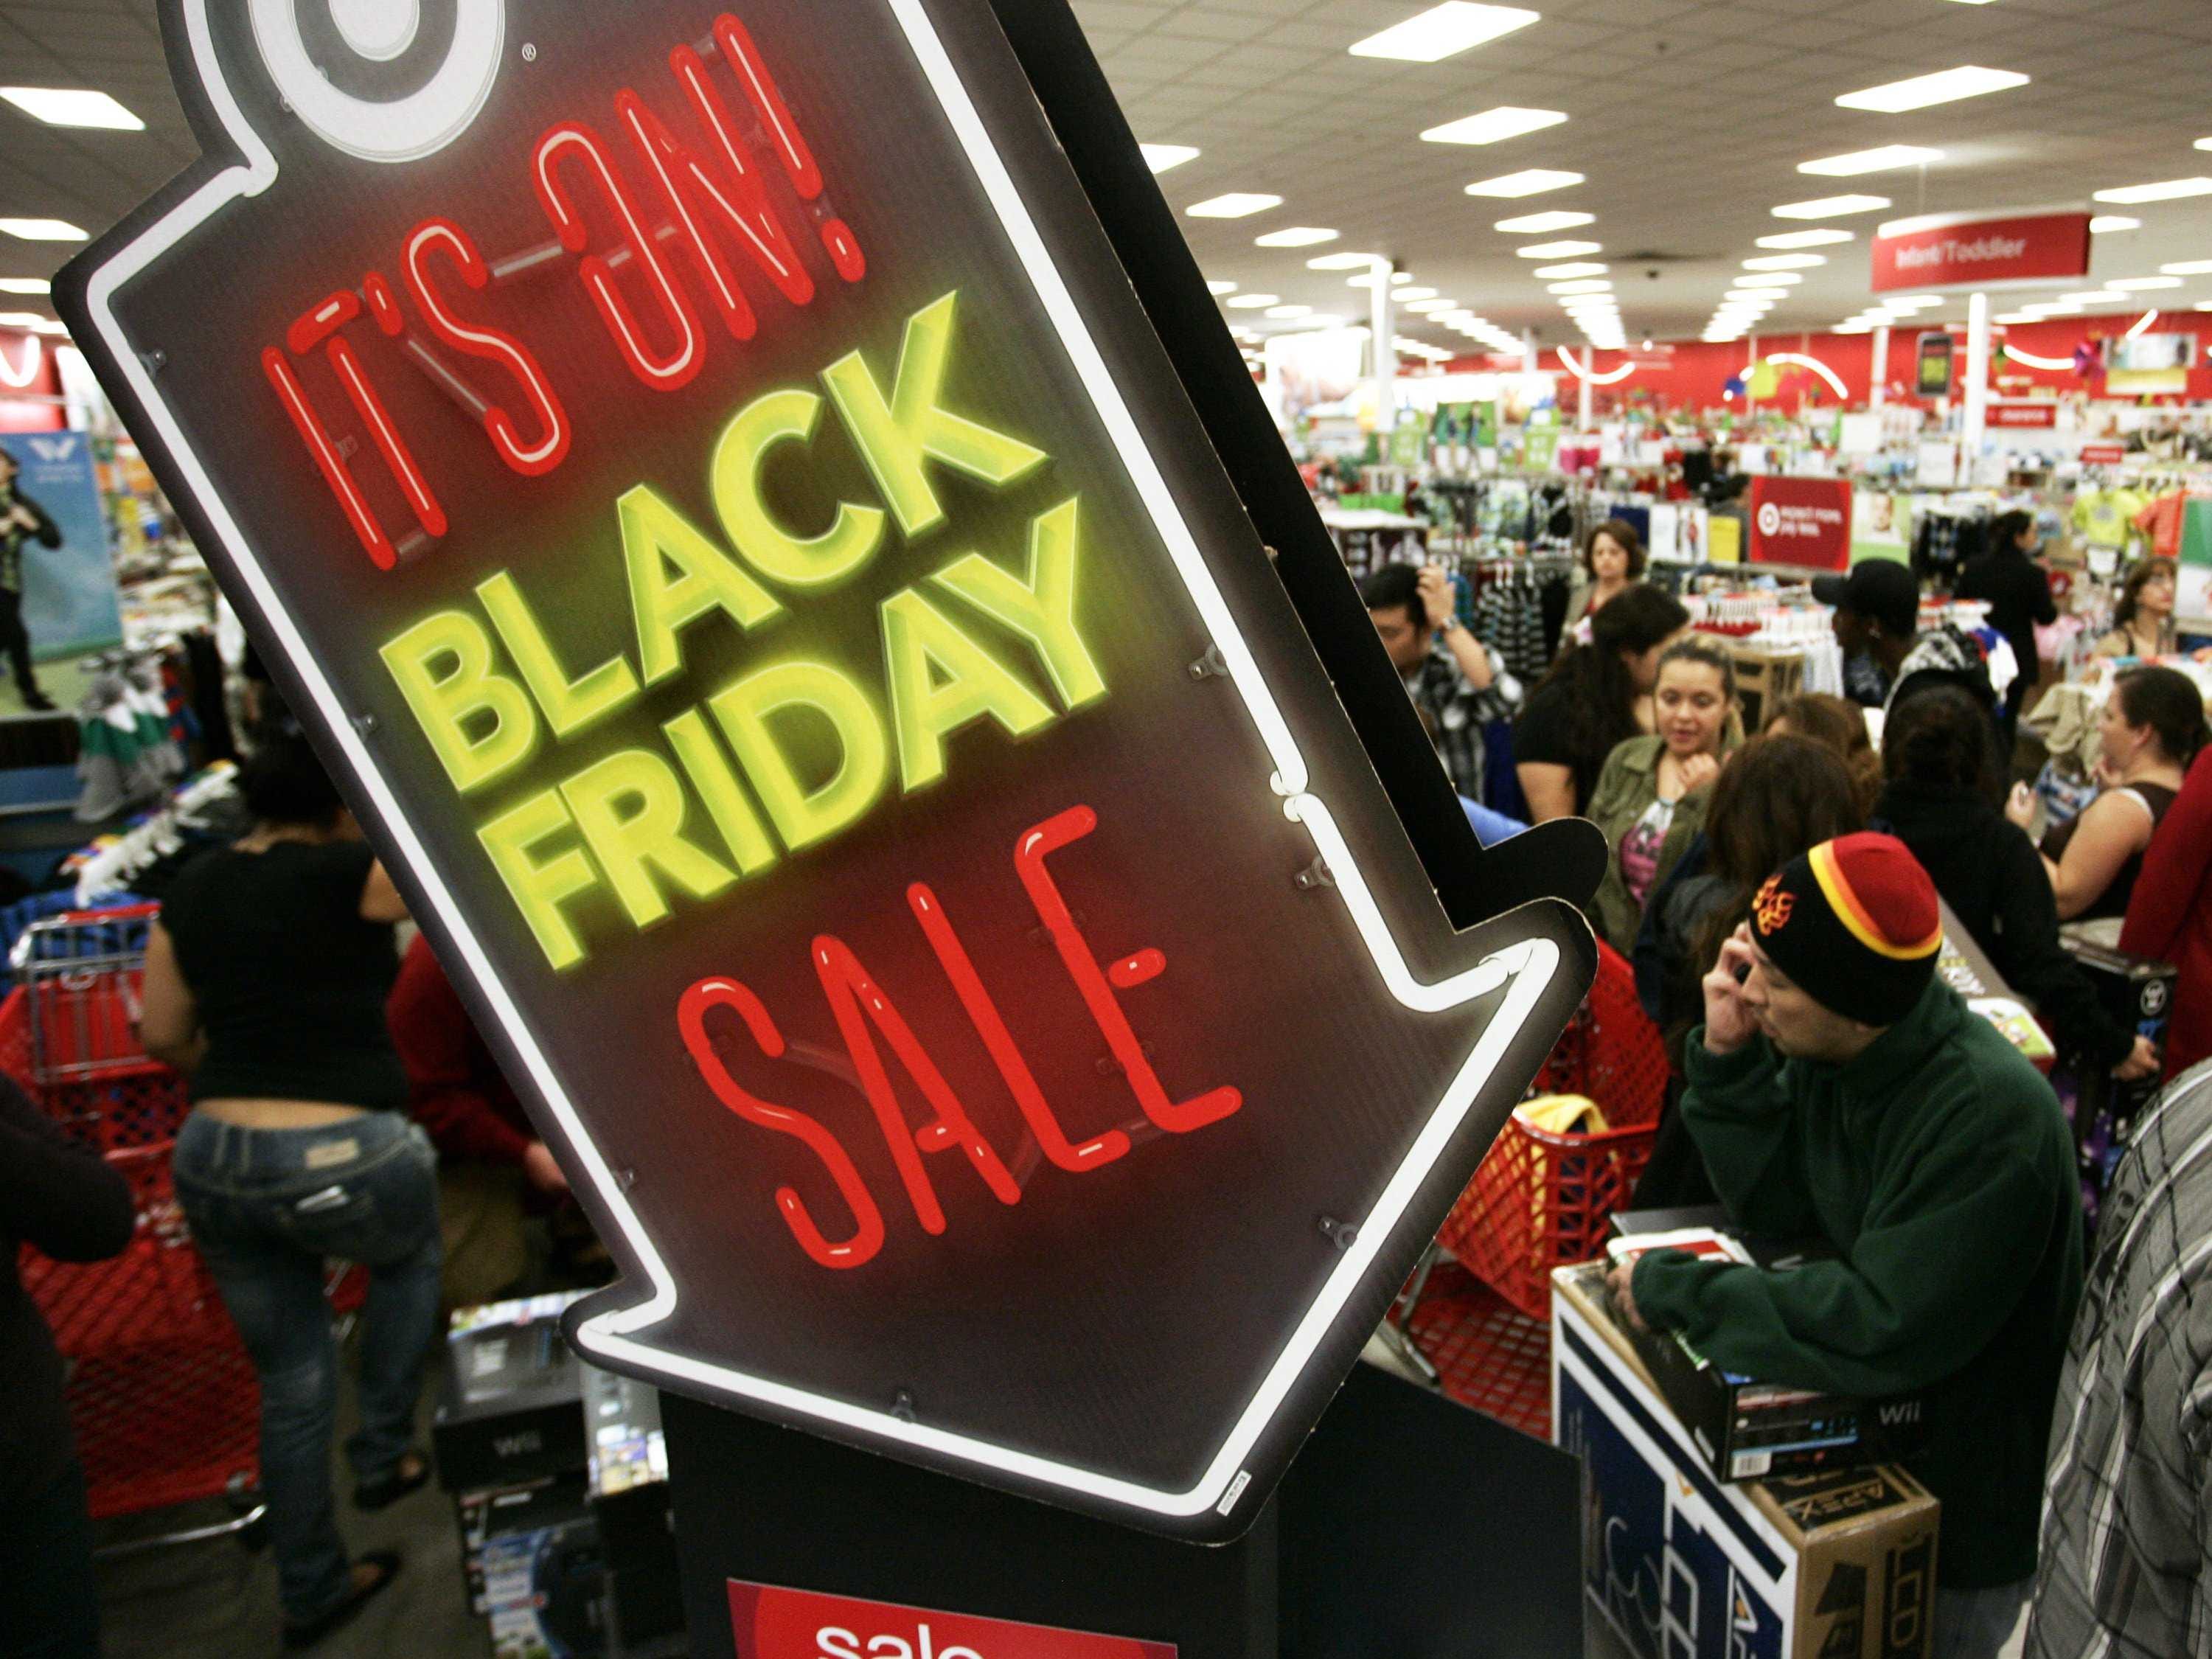 heres-what-not-to-buy-on-black-friday.jpg